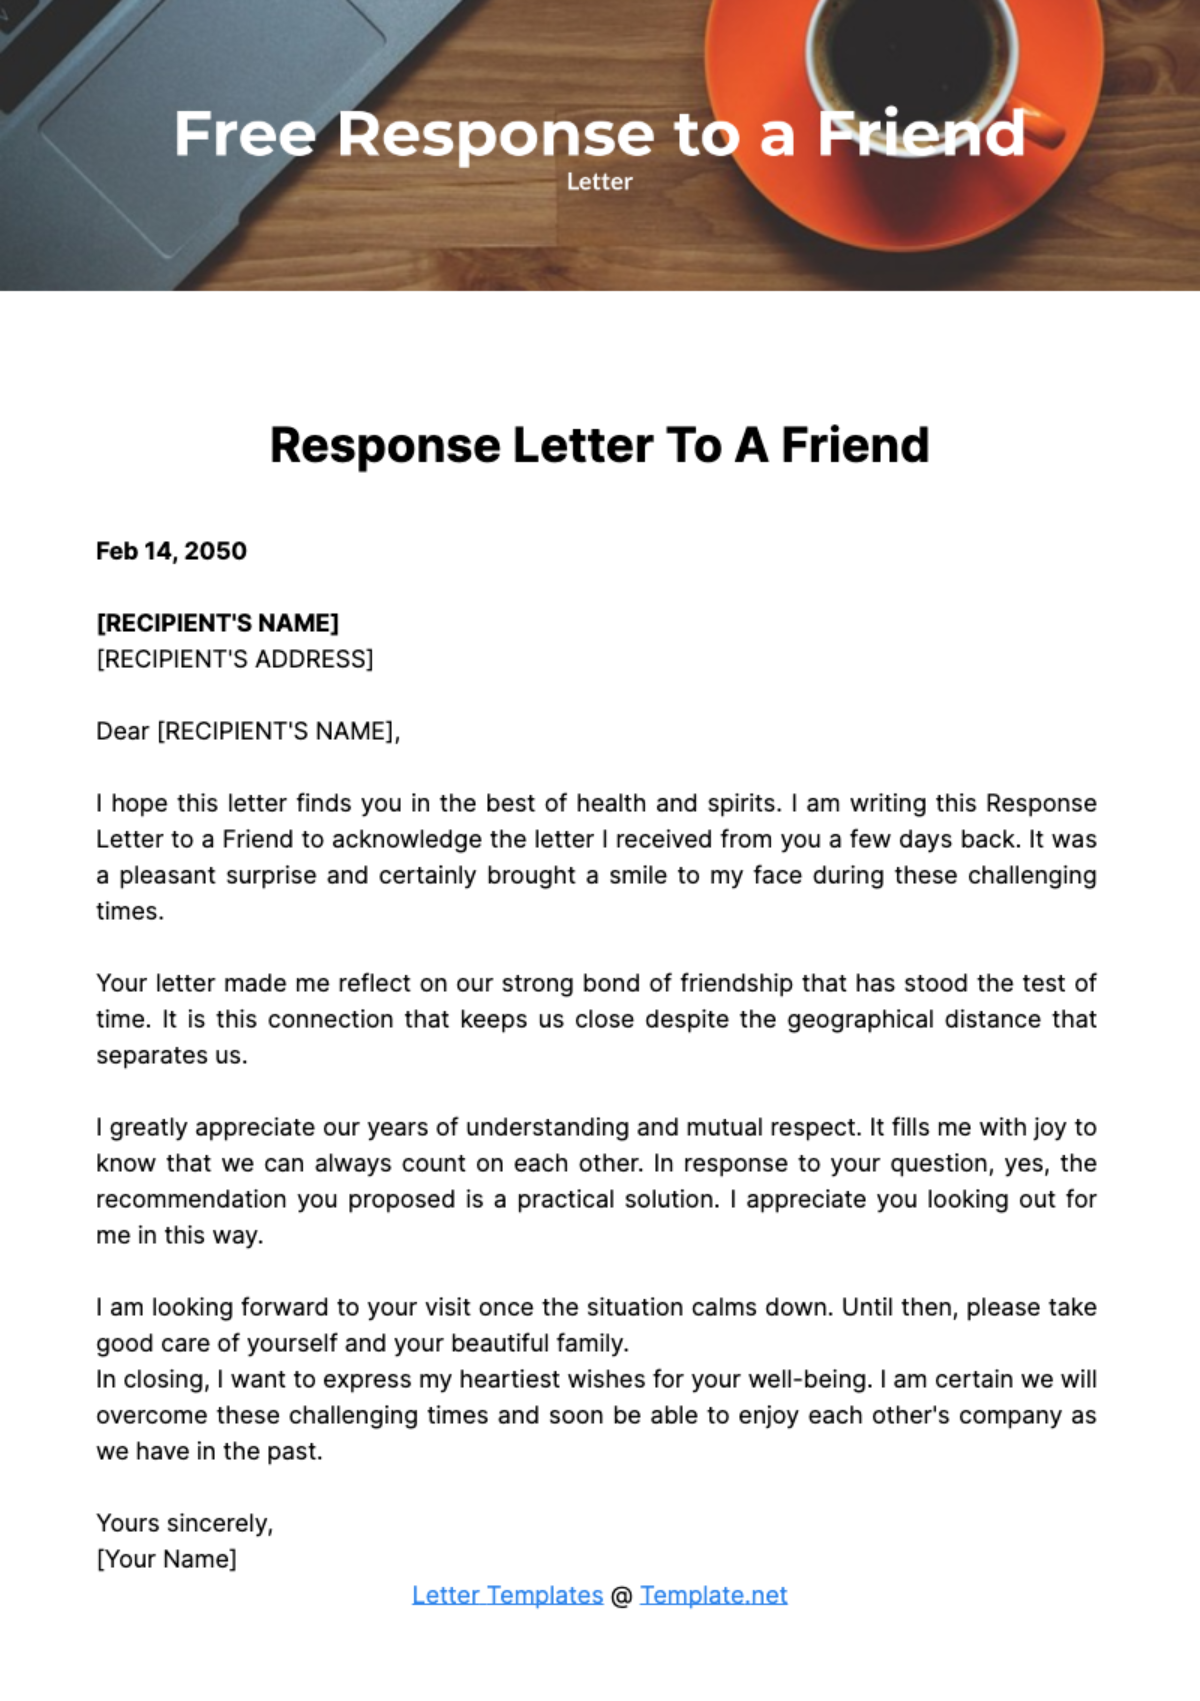 Free Response Letter to a Friend Template